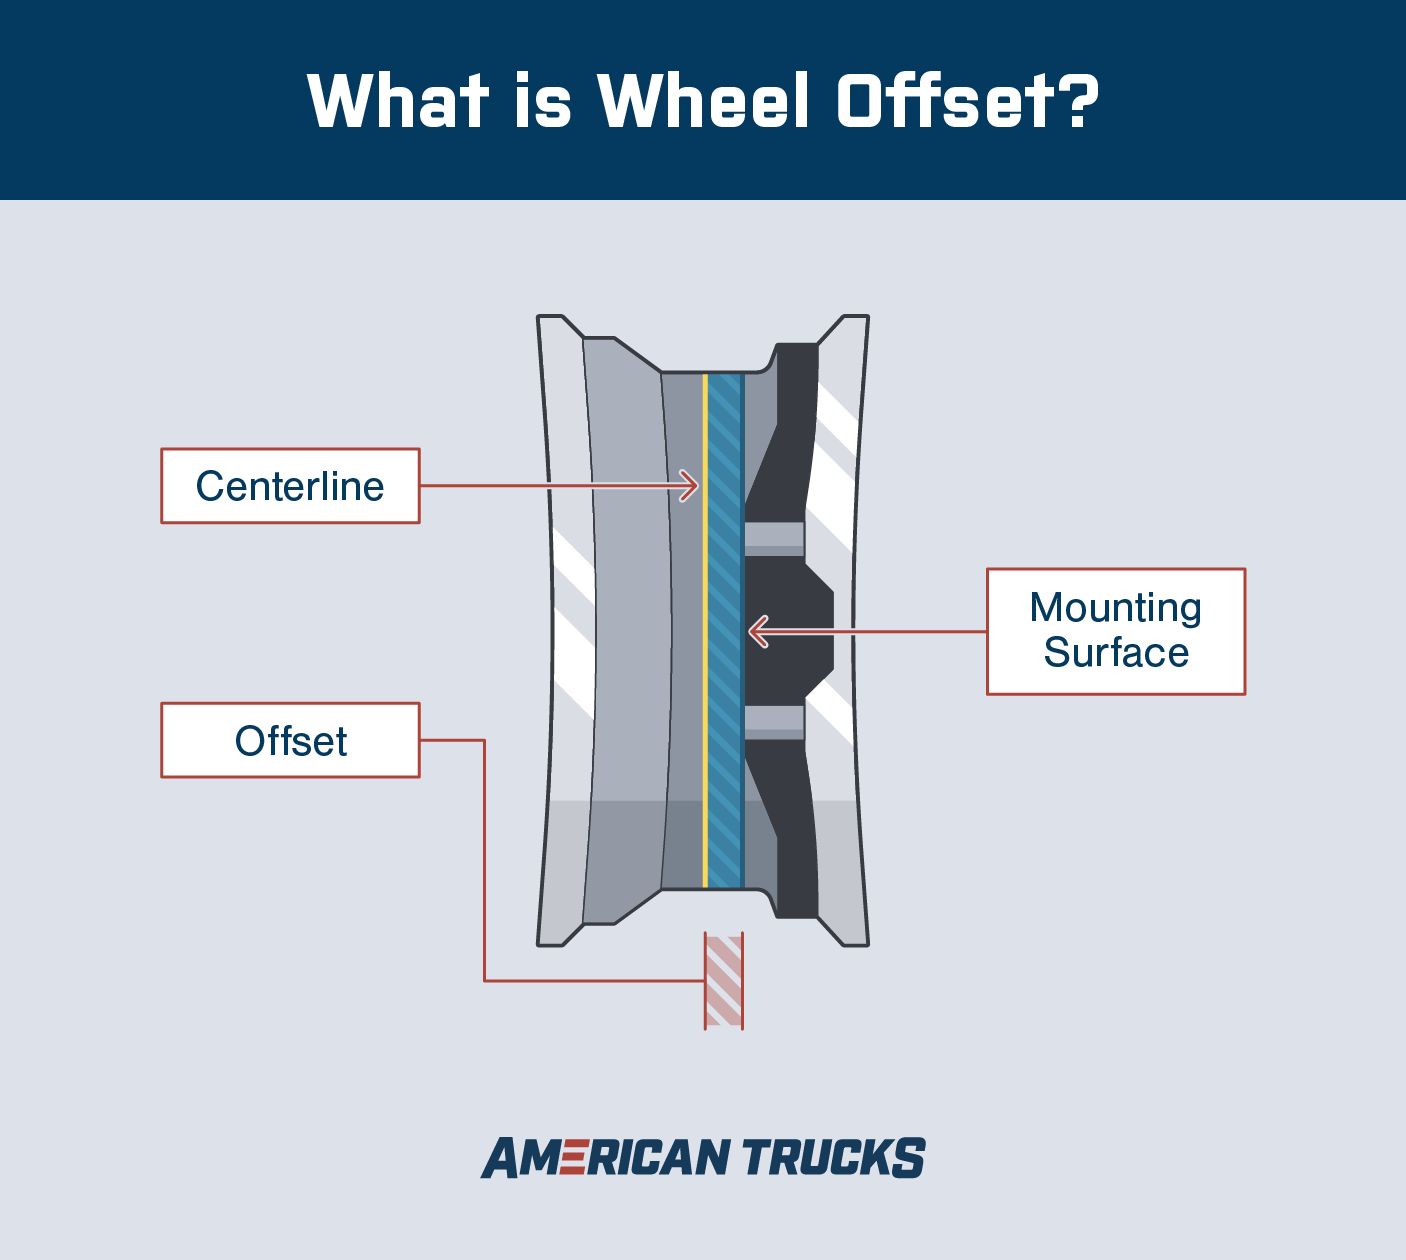 Graphic explaining what wheel offset is by showing the distance between the mounting surface and the centerline of a wheel